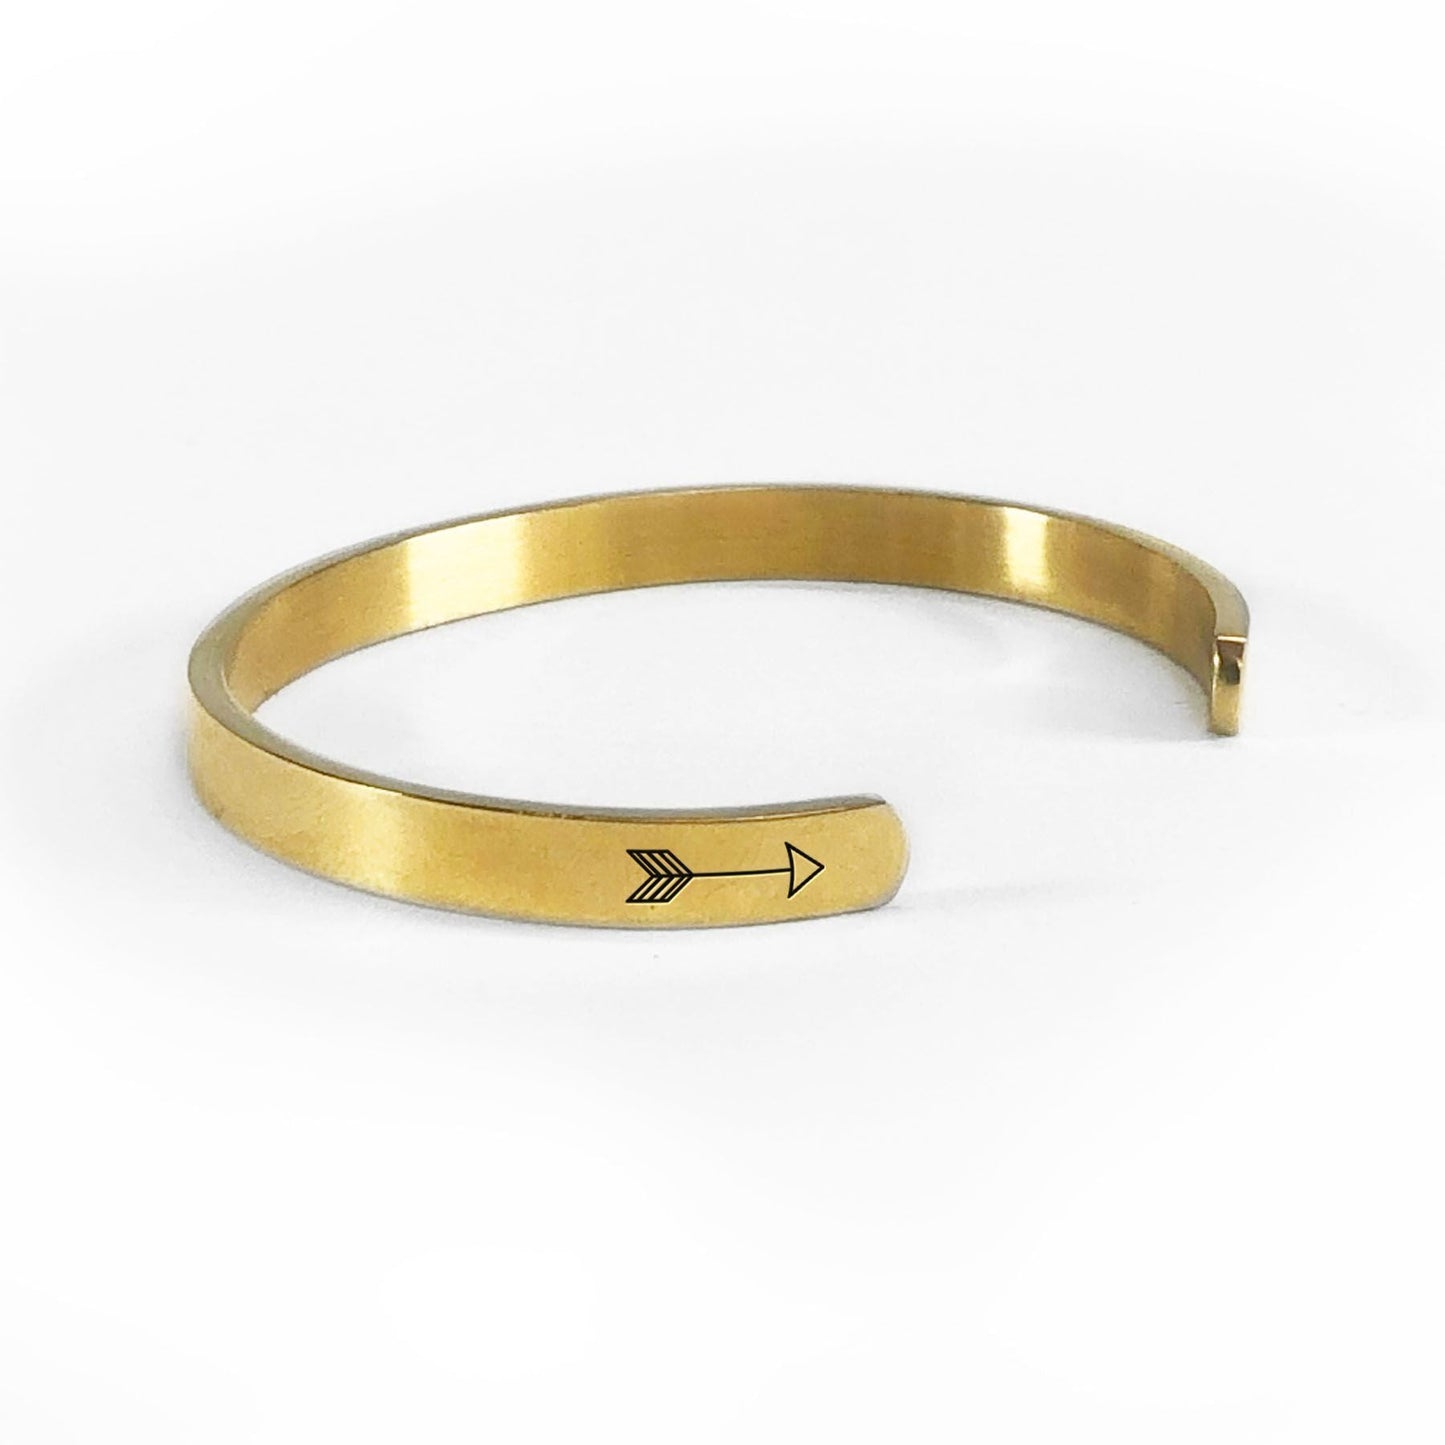 Home is where your mom is bracelet in gold rotated to show arrows and cuff opening